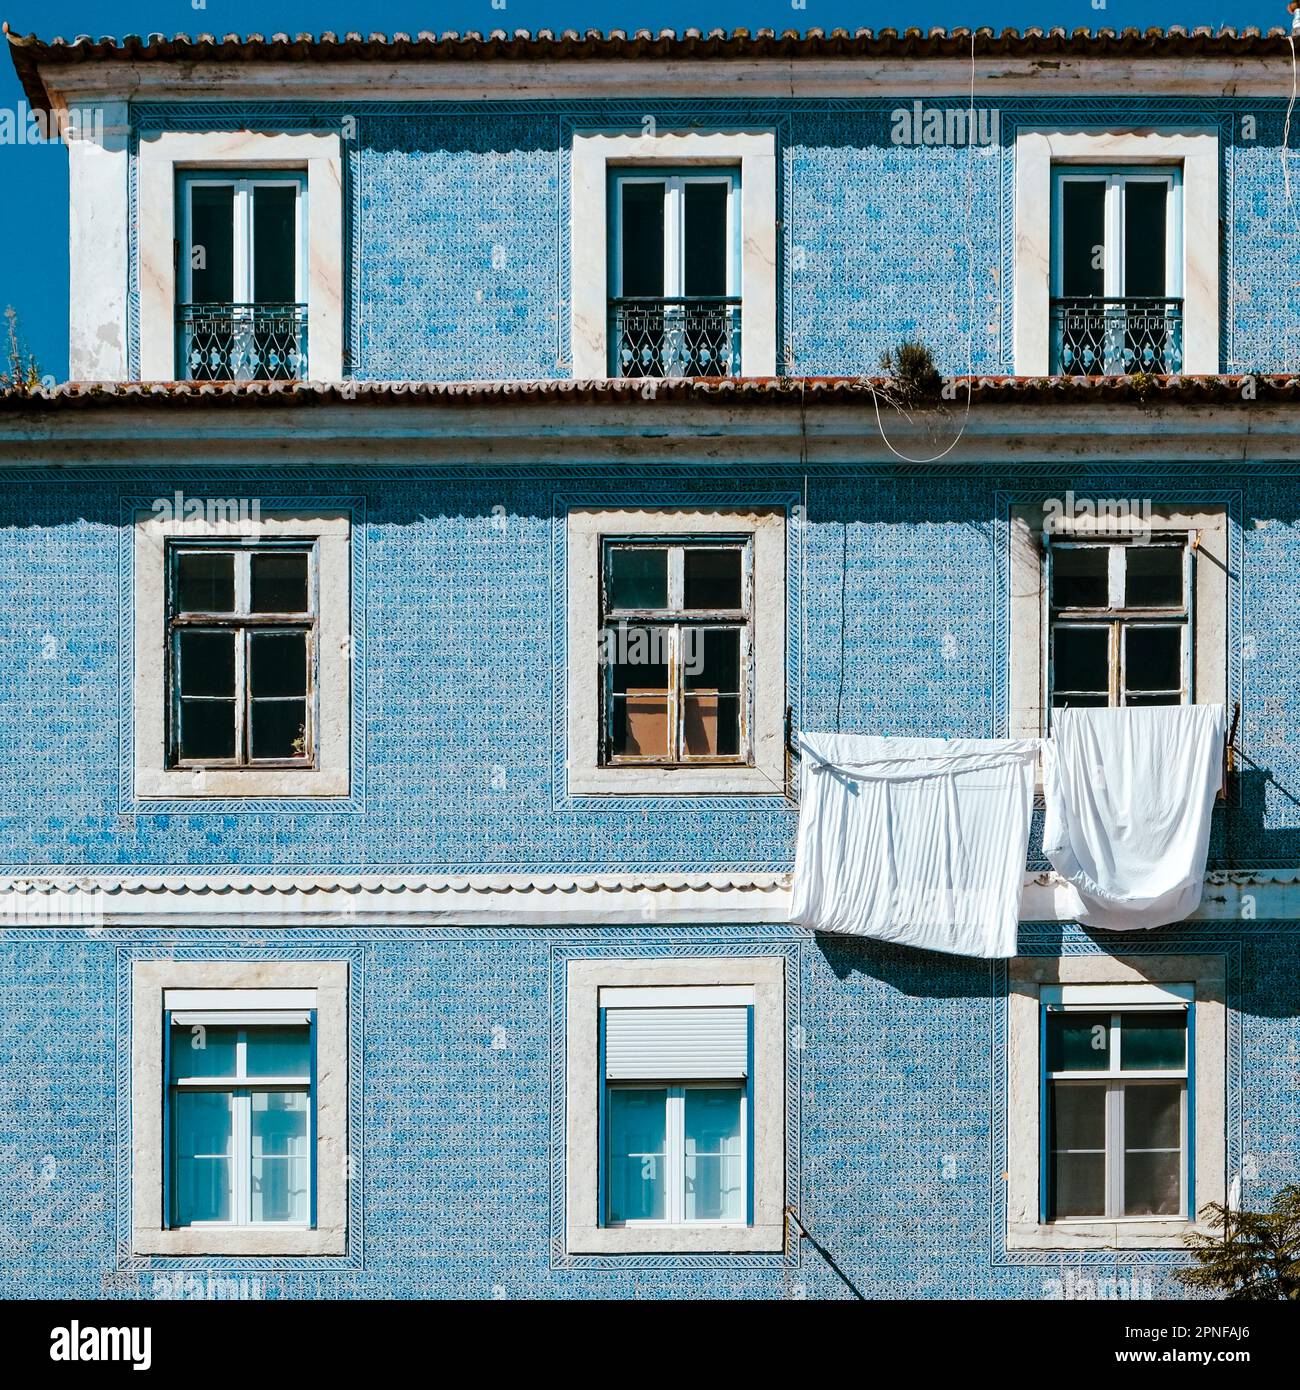 Portugal, Lisbon, Typical Portuguese Pombaline building with laundry hanging to dry Stock Photo